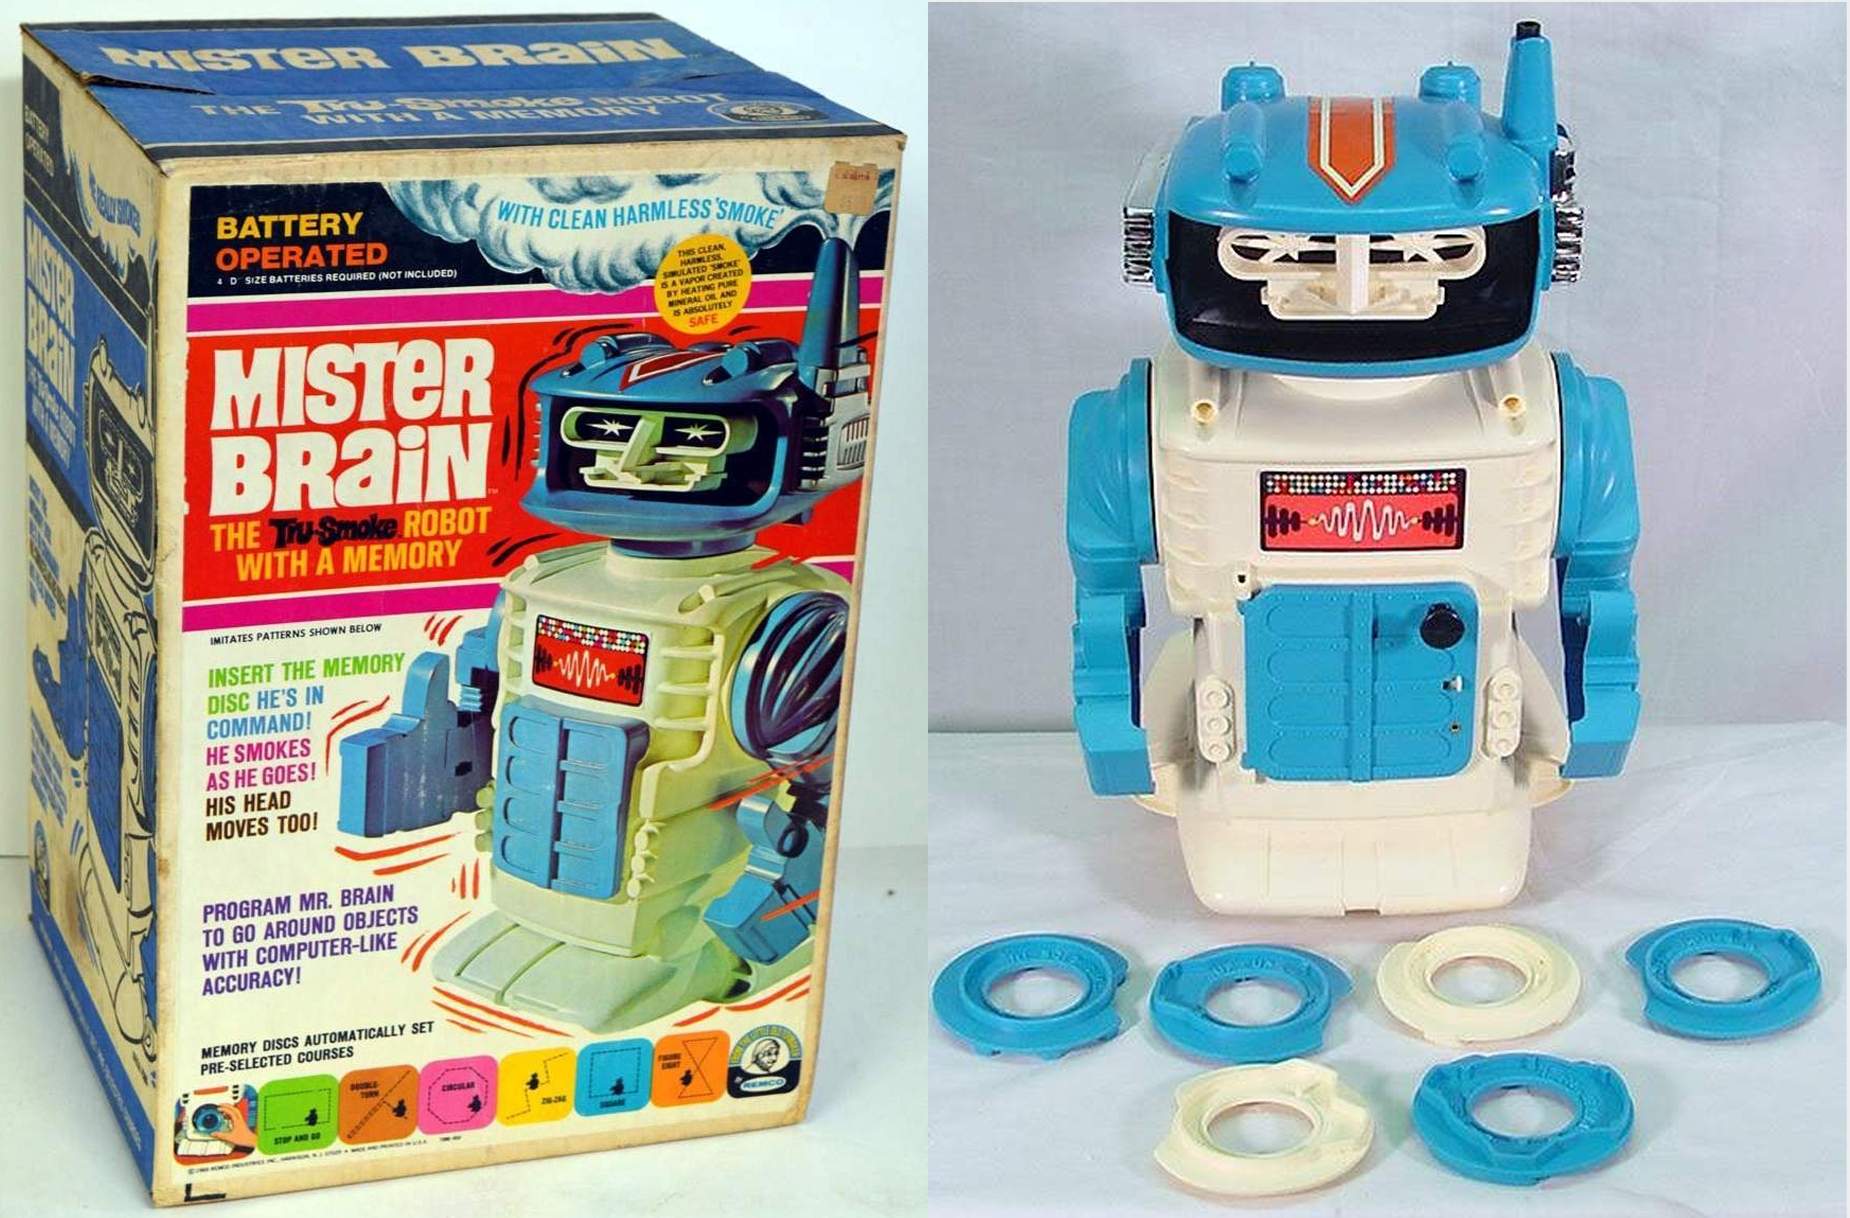 Mister Brain by Remco 1969 - The Old Robots Web Site, mister robots 